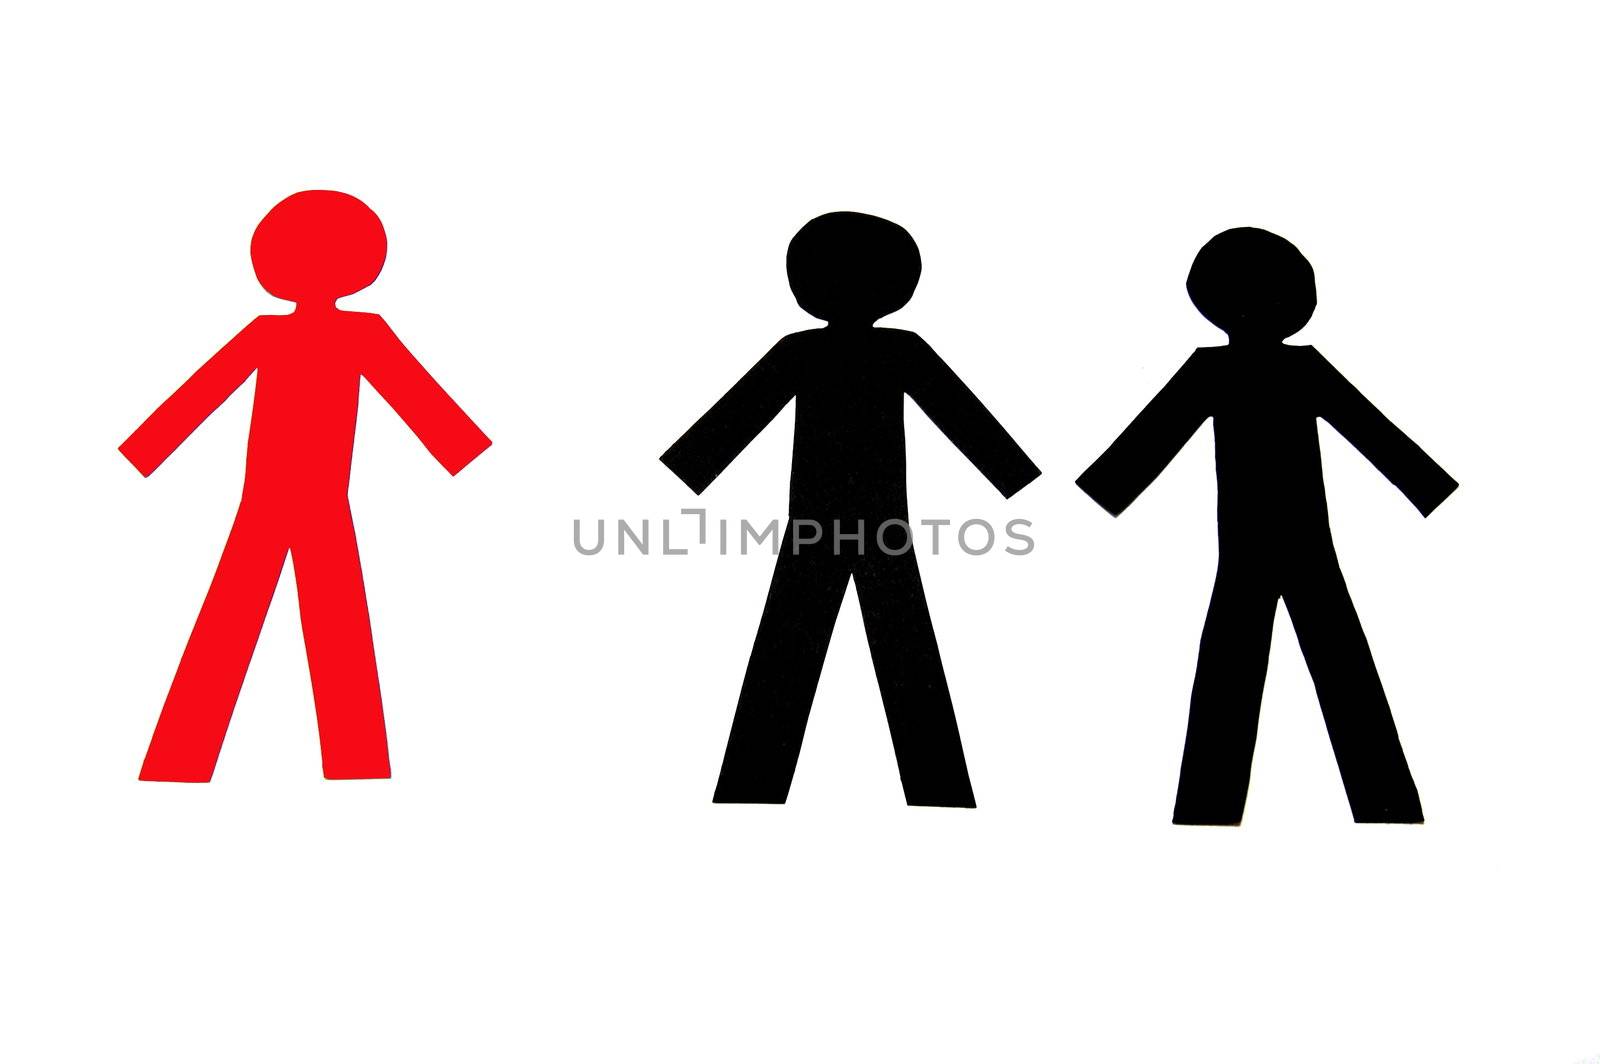 Some People made of Paper isolated on white background.